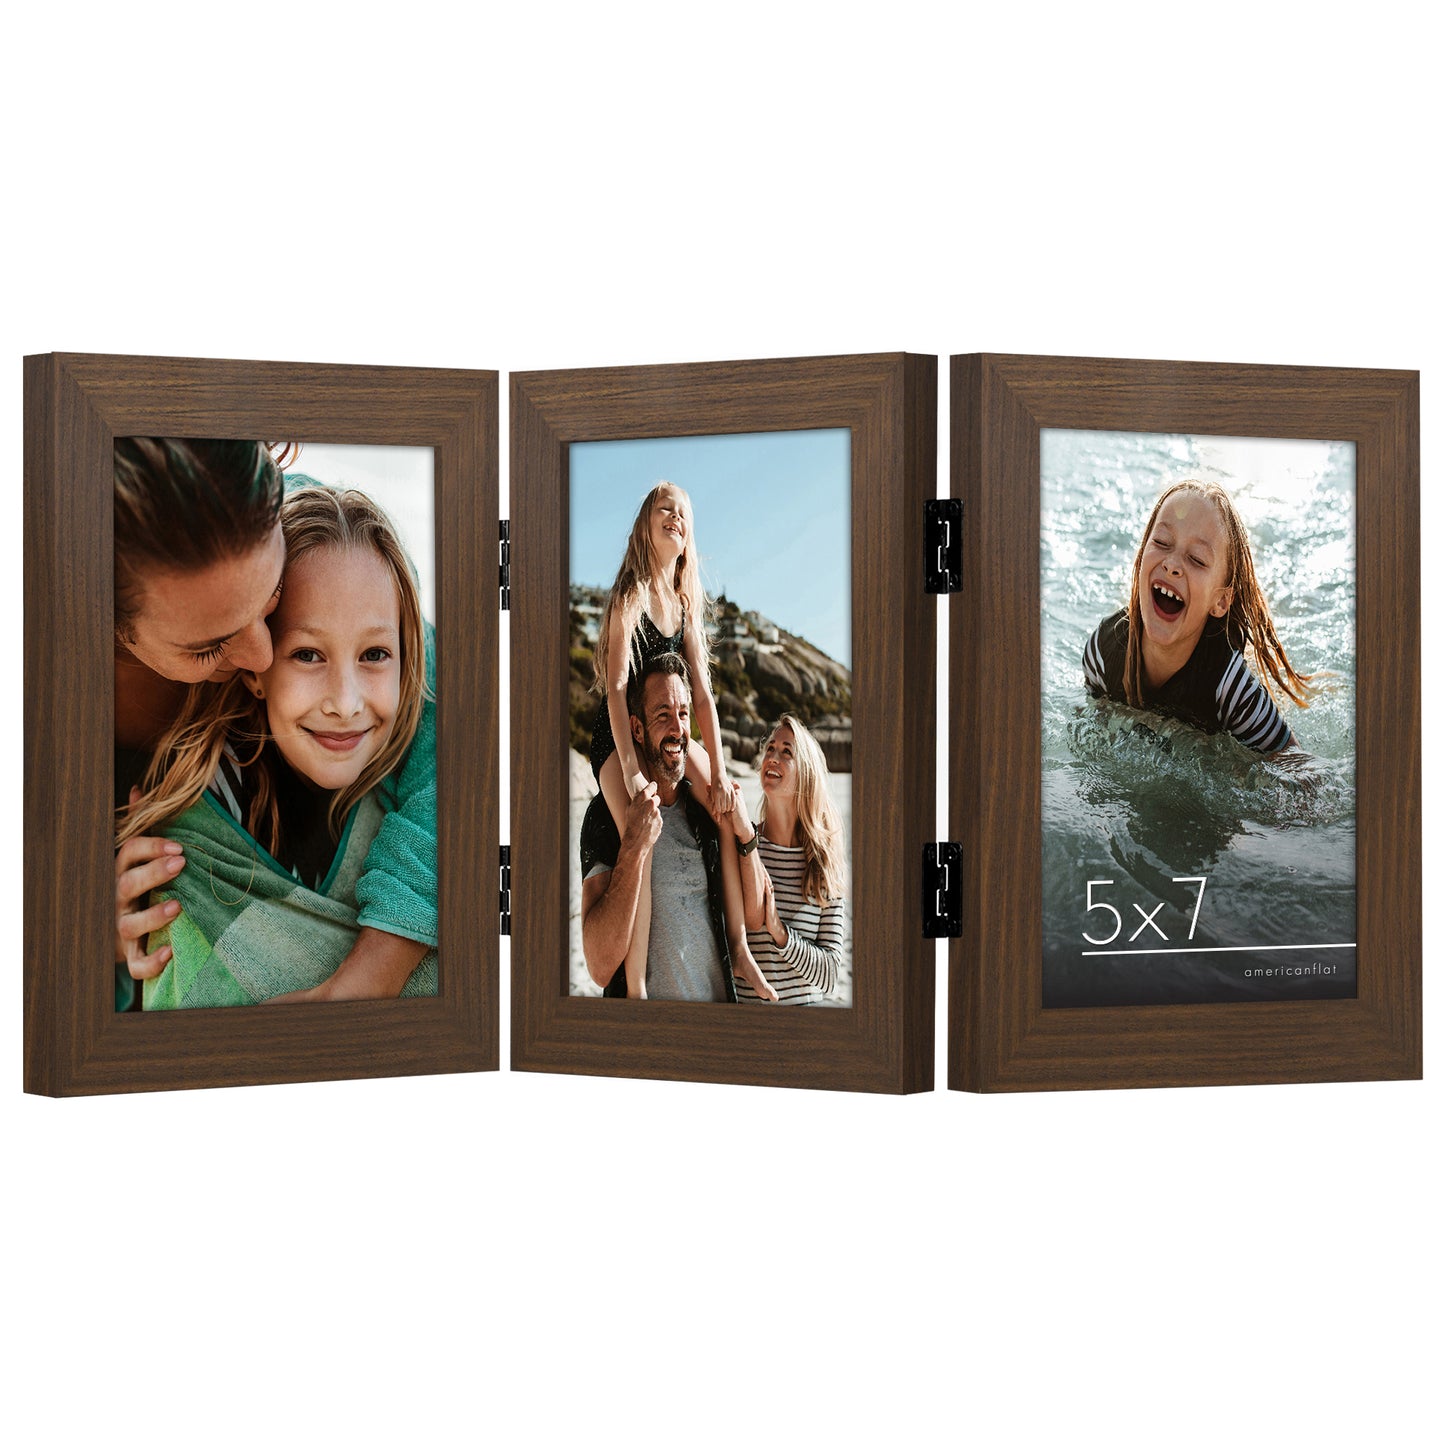 Hinged 3 Photo Picture Frame - Tri Folding Picture Frame For Desk - Displays 3 Photos with Shatter-Resistant Glass Covers